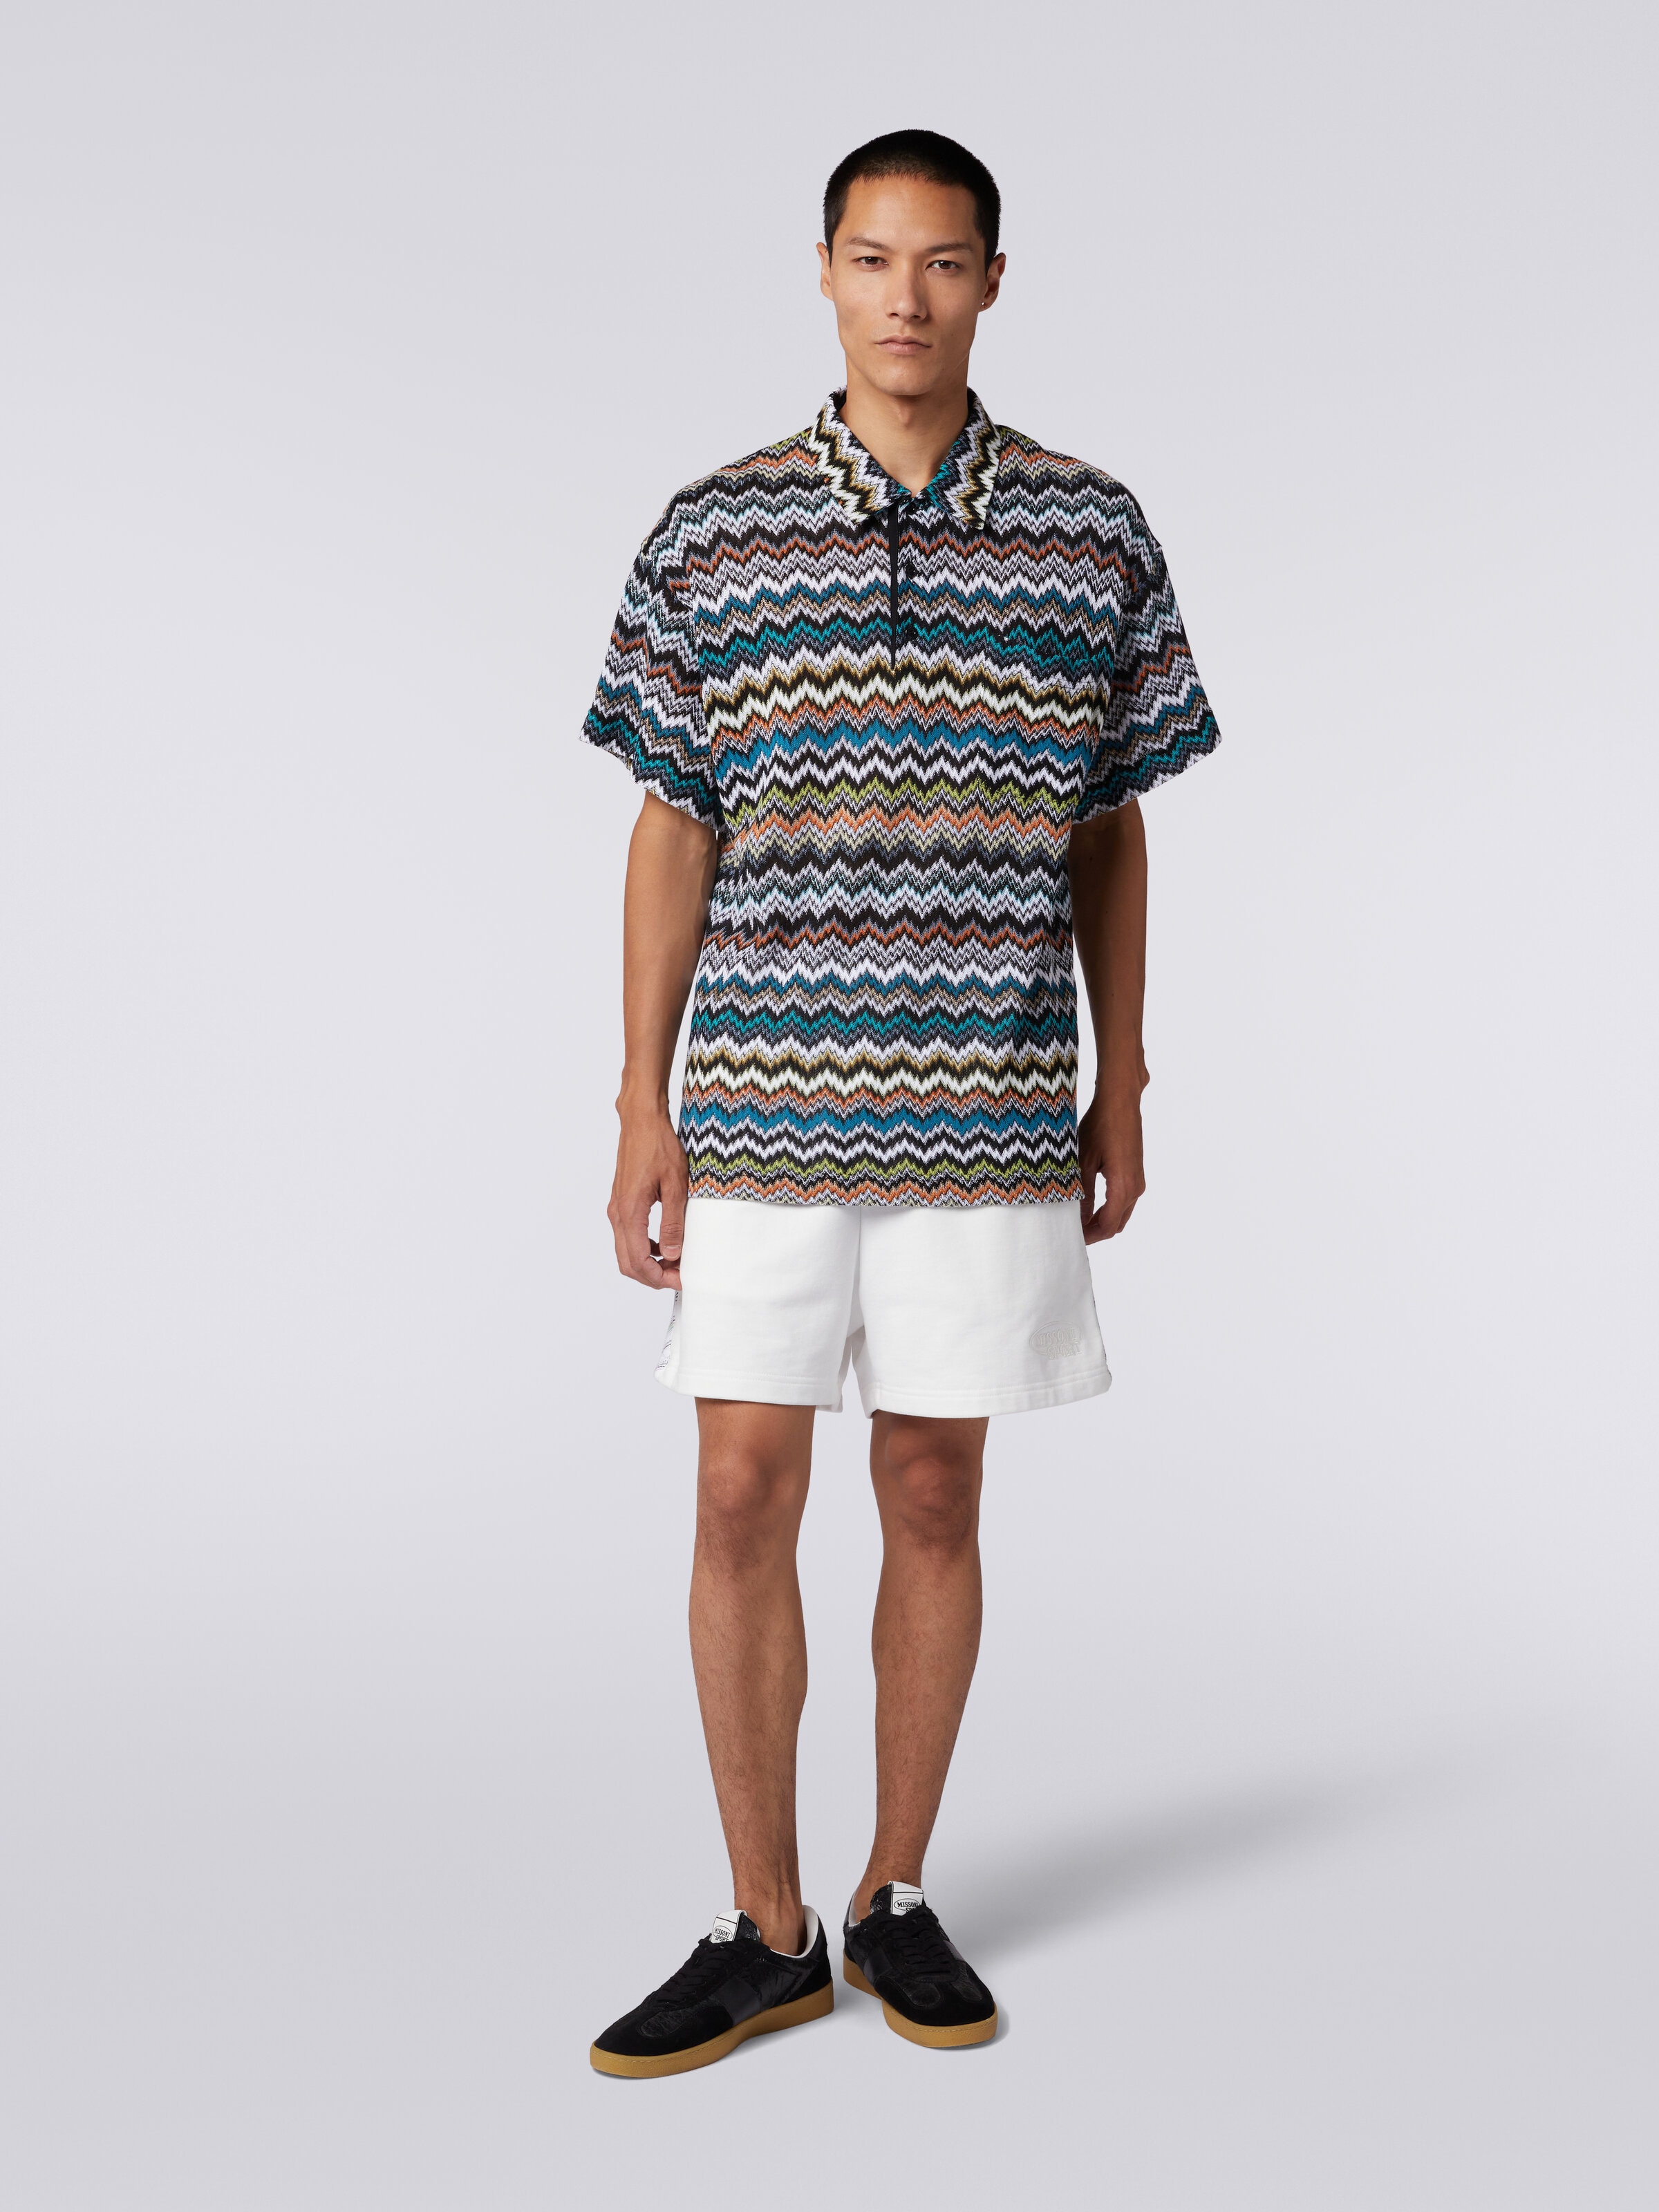 Polo shirt in zigzag cotton and viscose knit, Multicoloured  - 1